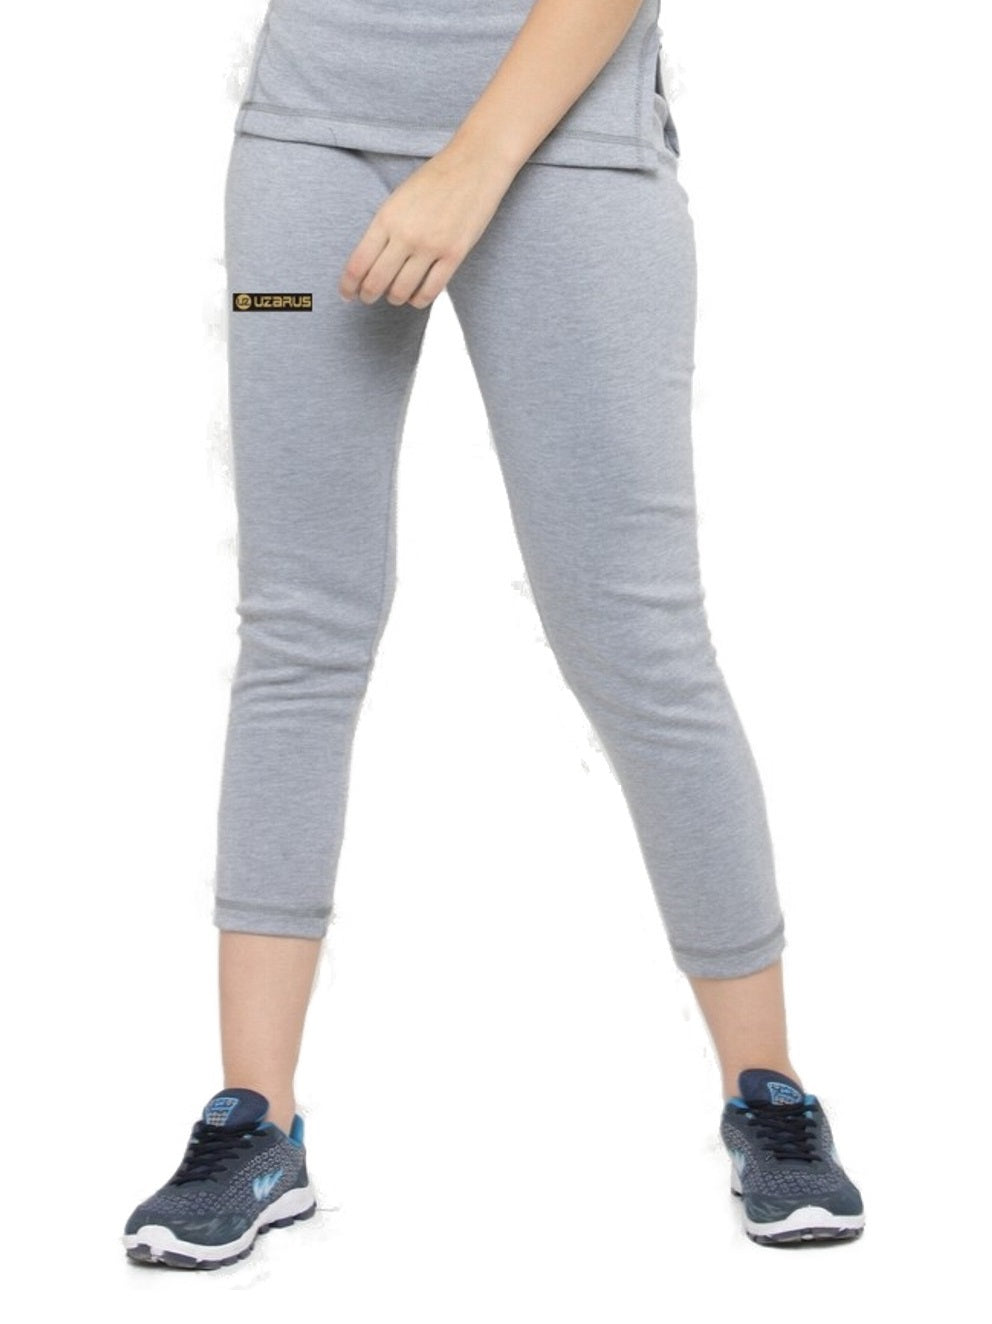 WOMEN'S SOLID THERMAL BOTTOM